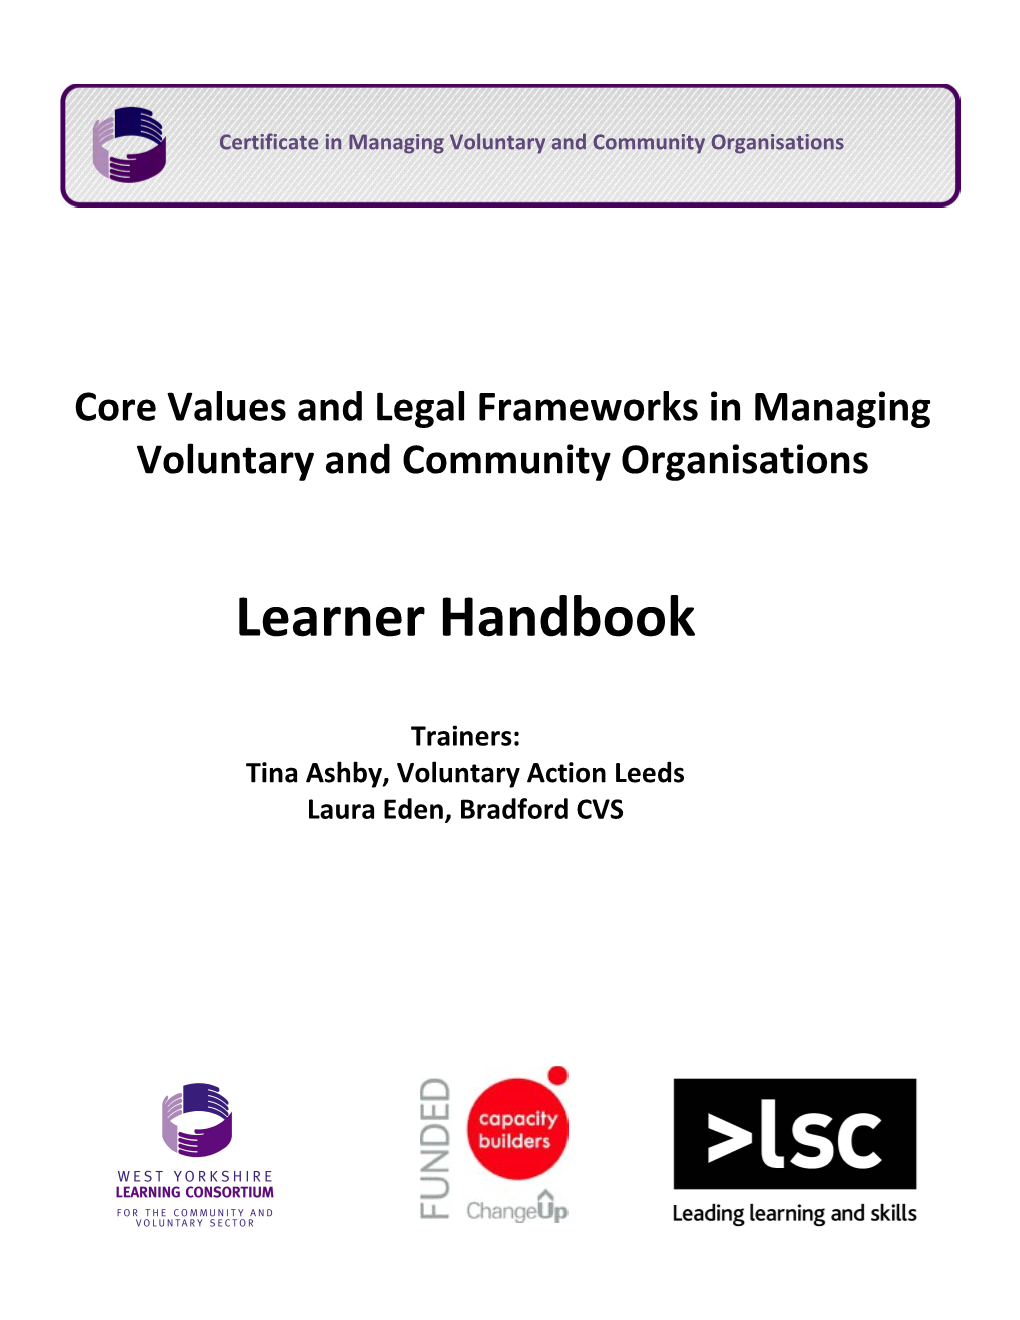 UNIT TITLE: Core Values and Legal Frameworks in Managing Voluntary and Community Organisations